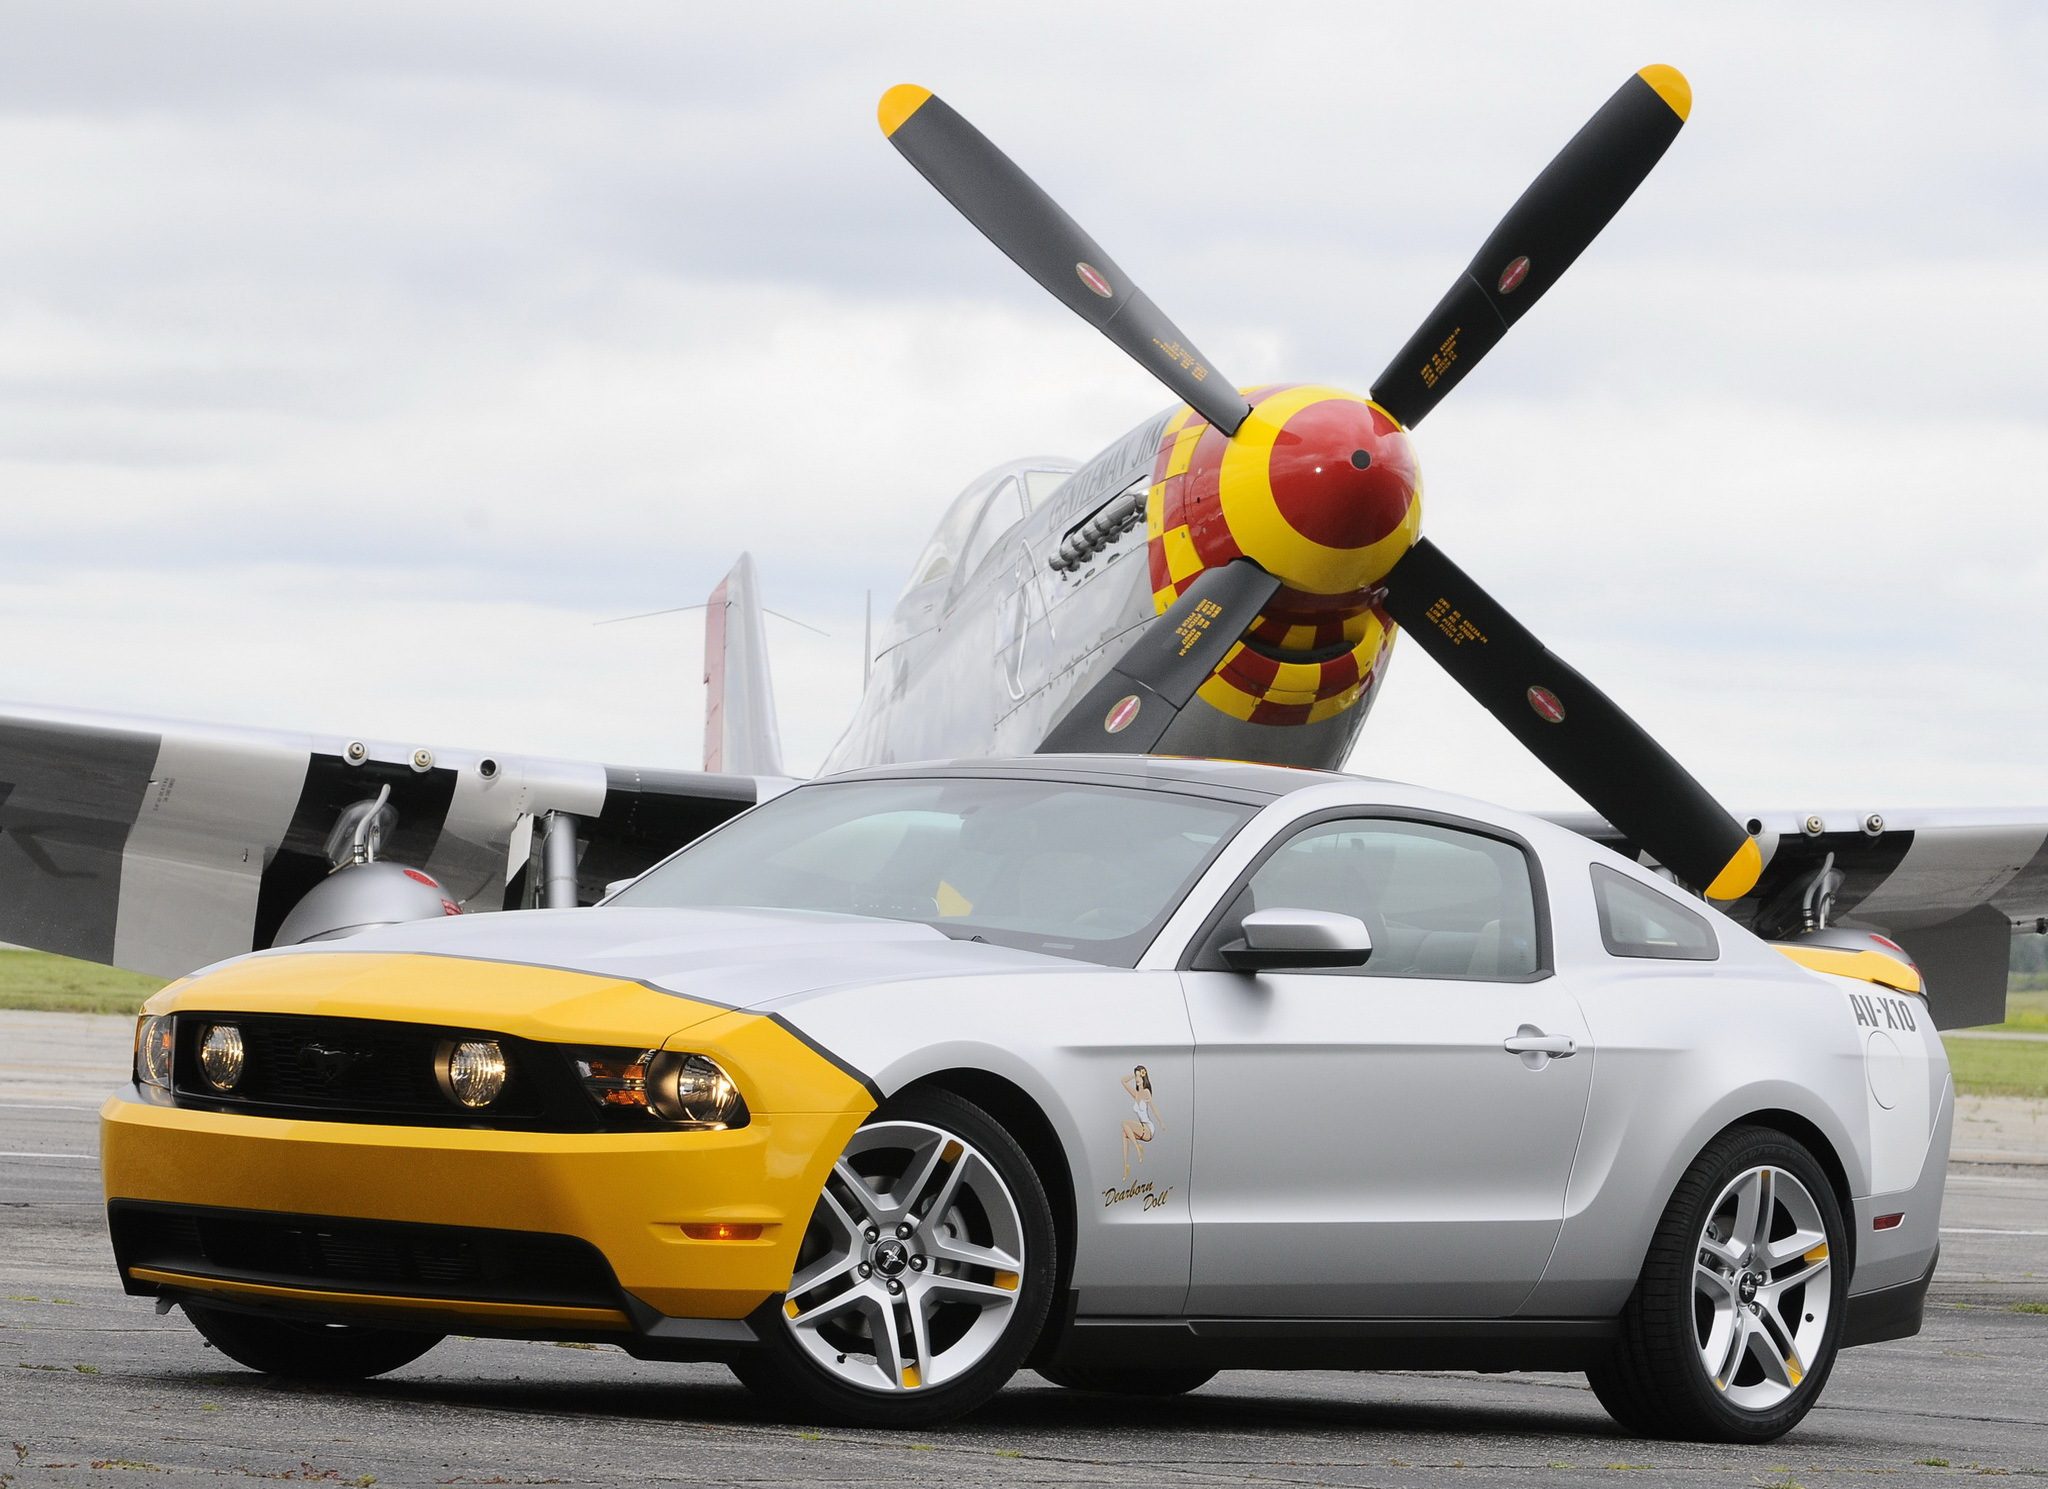 Mustang Of The Day: 2010 Ford Mustang AV-X10 Dearborn Doll